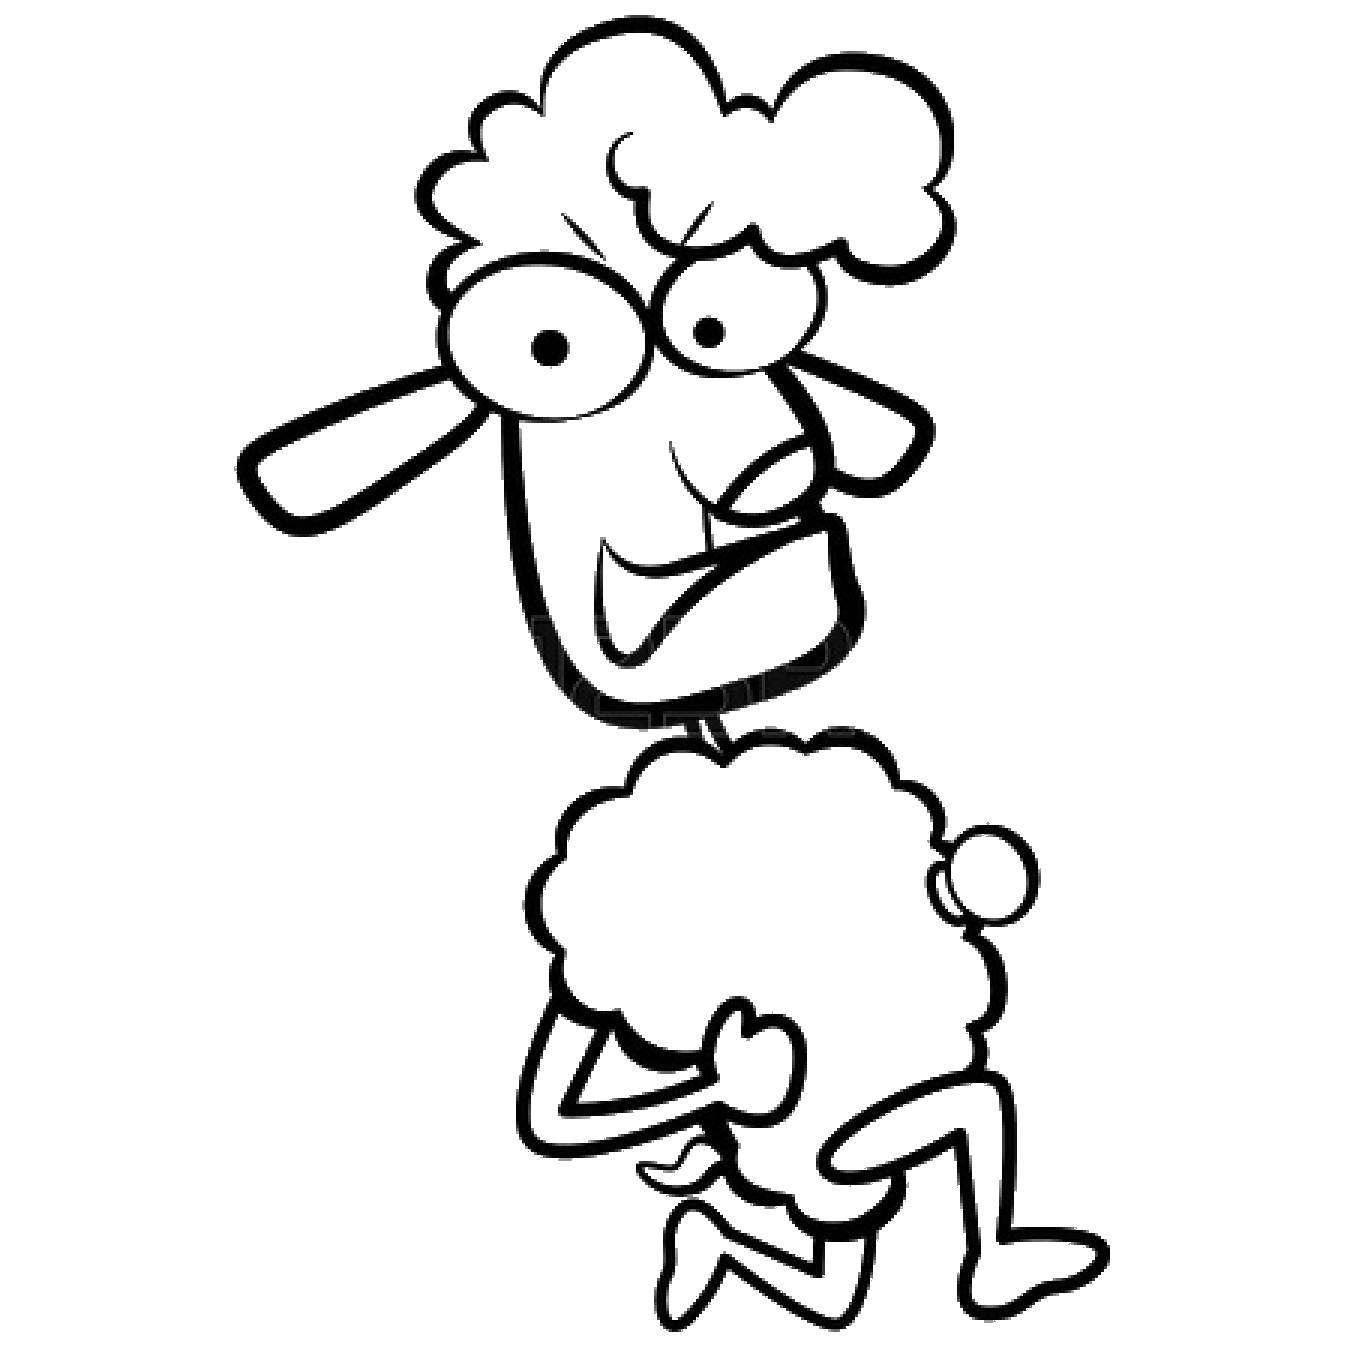 Coloring Funny lamb. Category The contour of sheep to cut. Tags:  Animals, sheep.